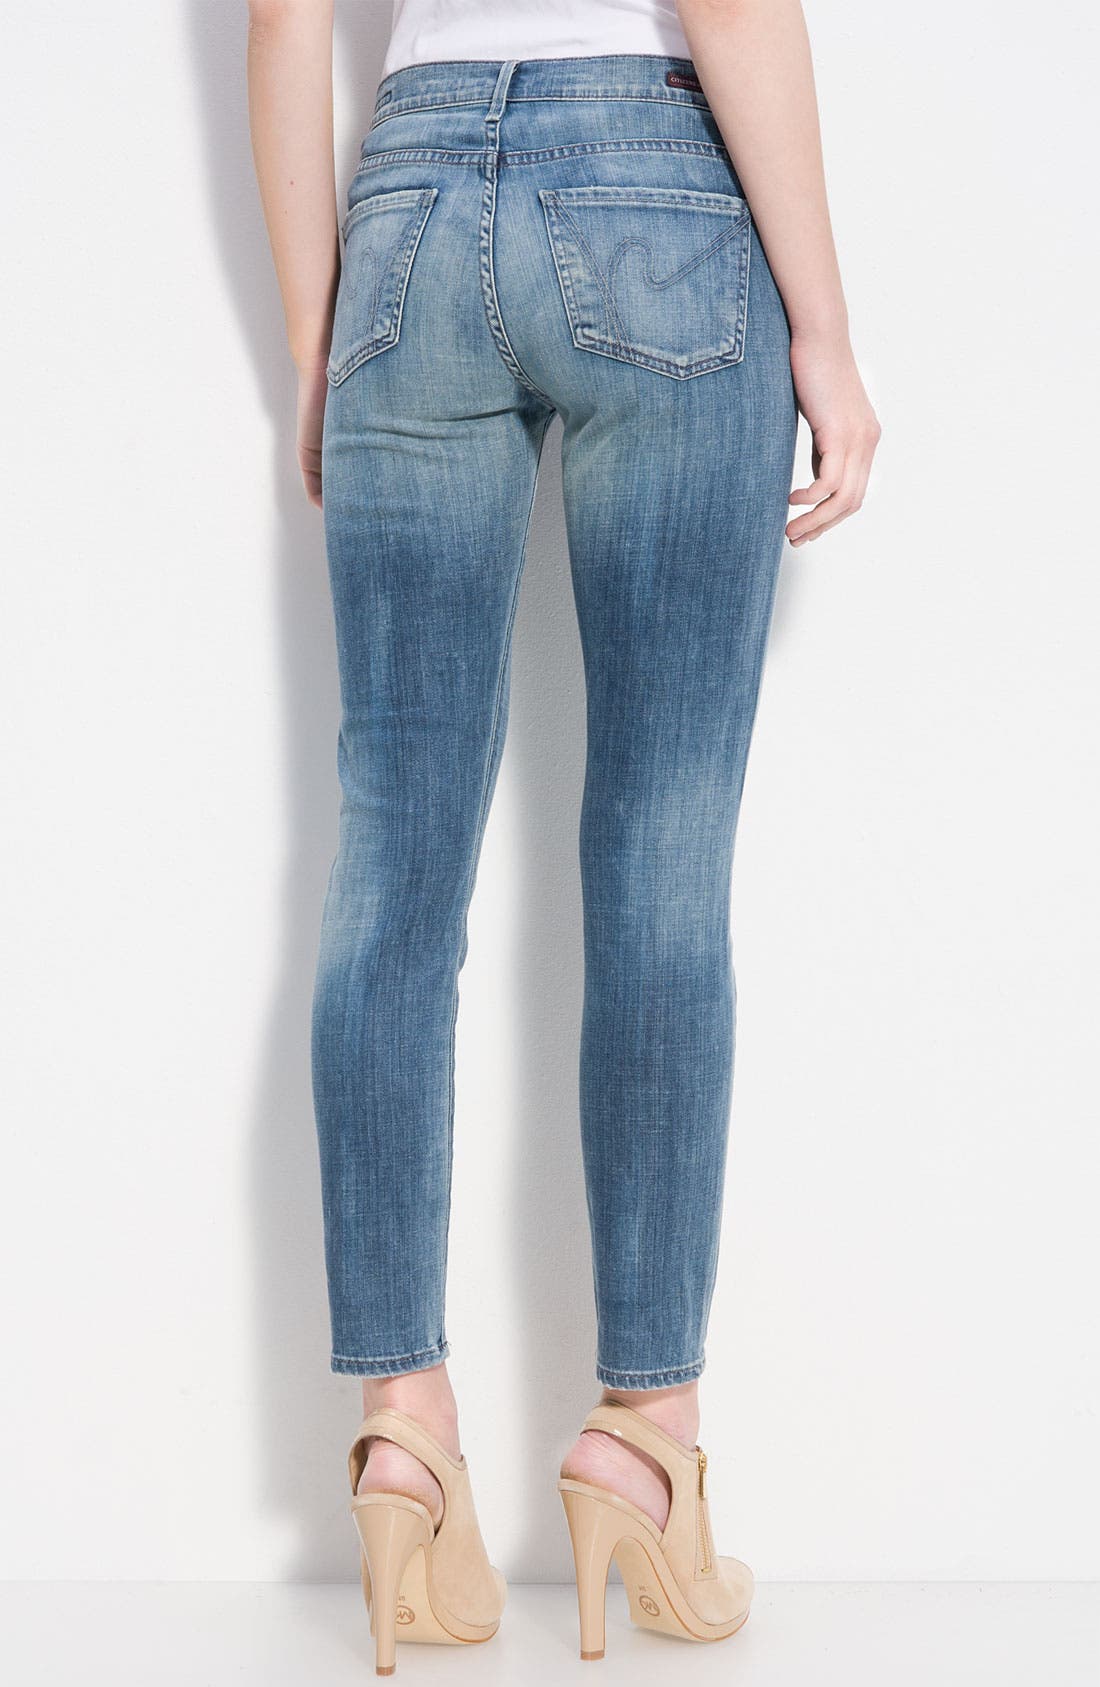 citizens of humanity thompson jeans